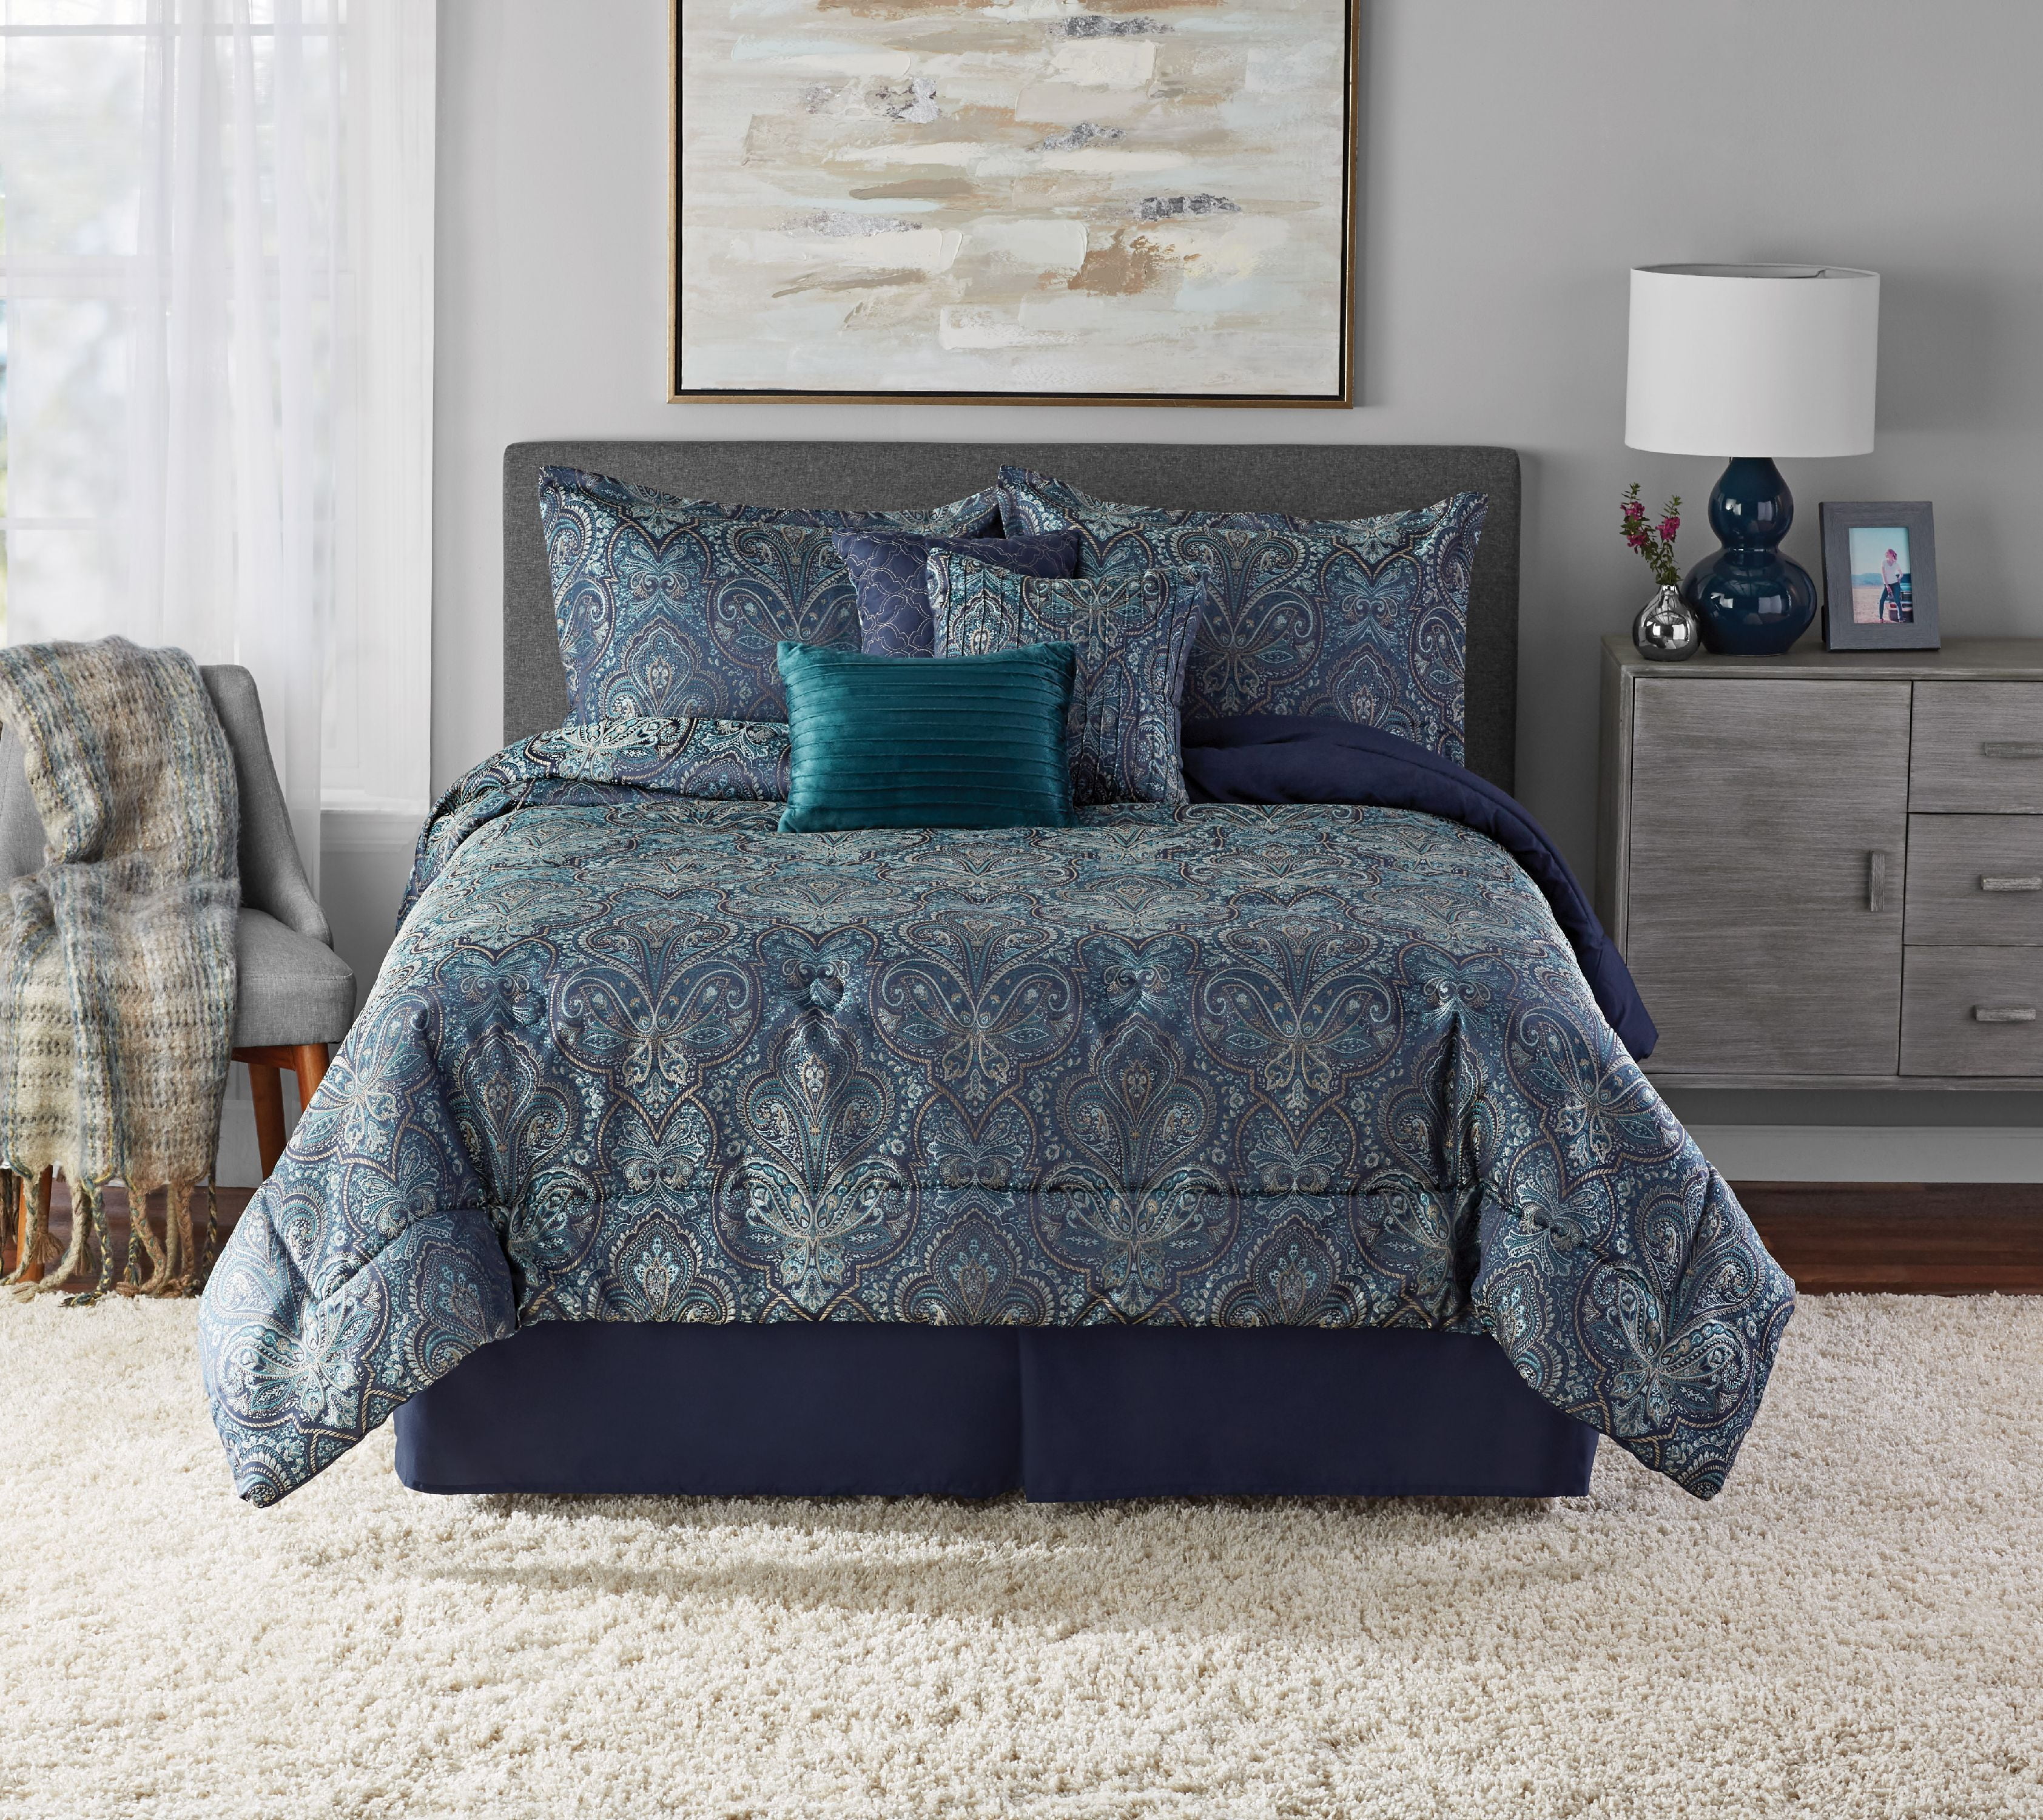 7 Piece by Mainstays Full/Queen King Red Blue Woven Jacquard Teal Comforter Set 